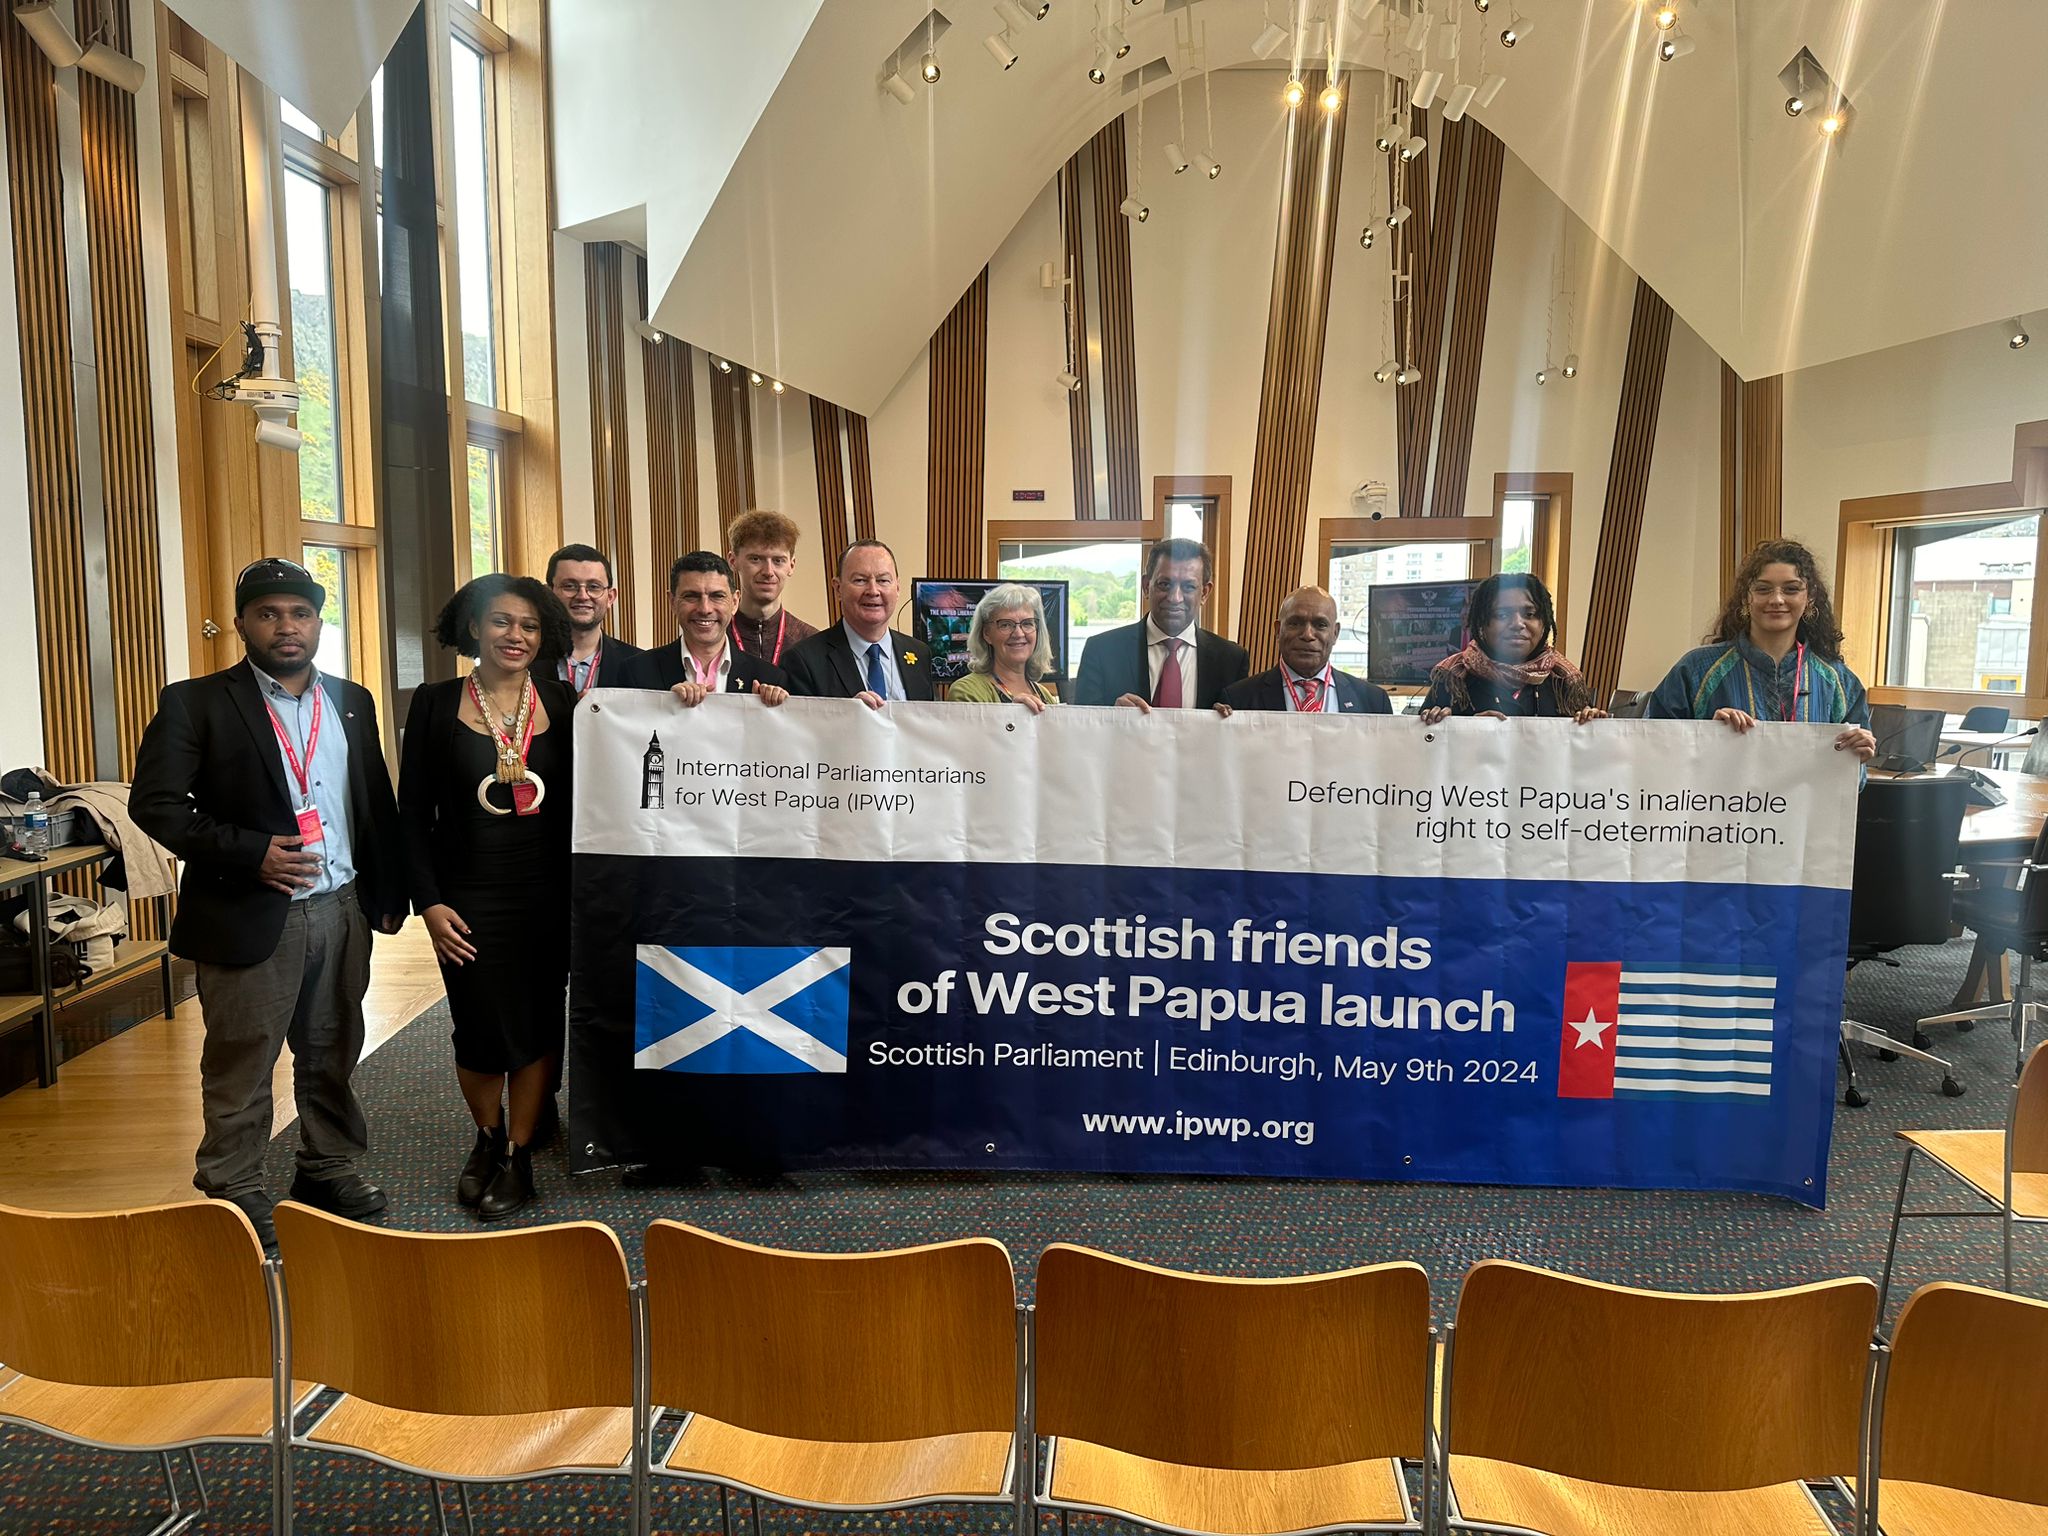 News: Scottish Friends of West Papua launched in Scottish Parliament